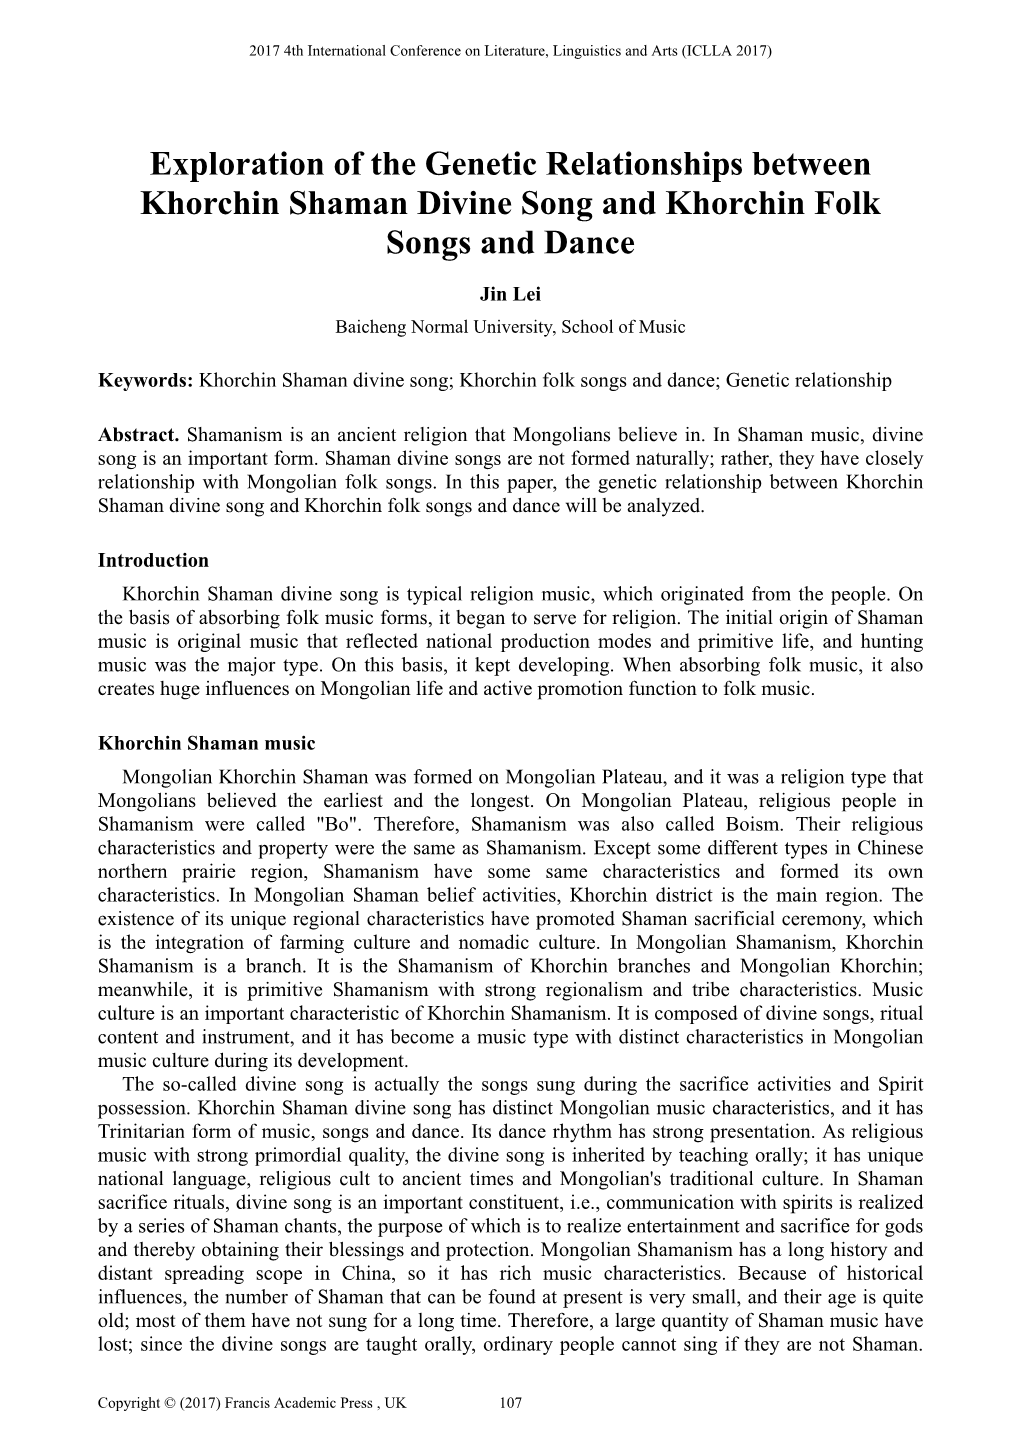 Exploration of the Genetic Relationships Between Khorchin Shaman Divine Song and Khorchin Folk Songs and Dance